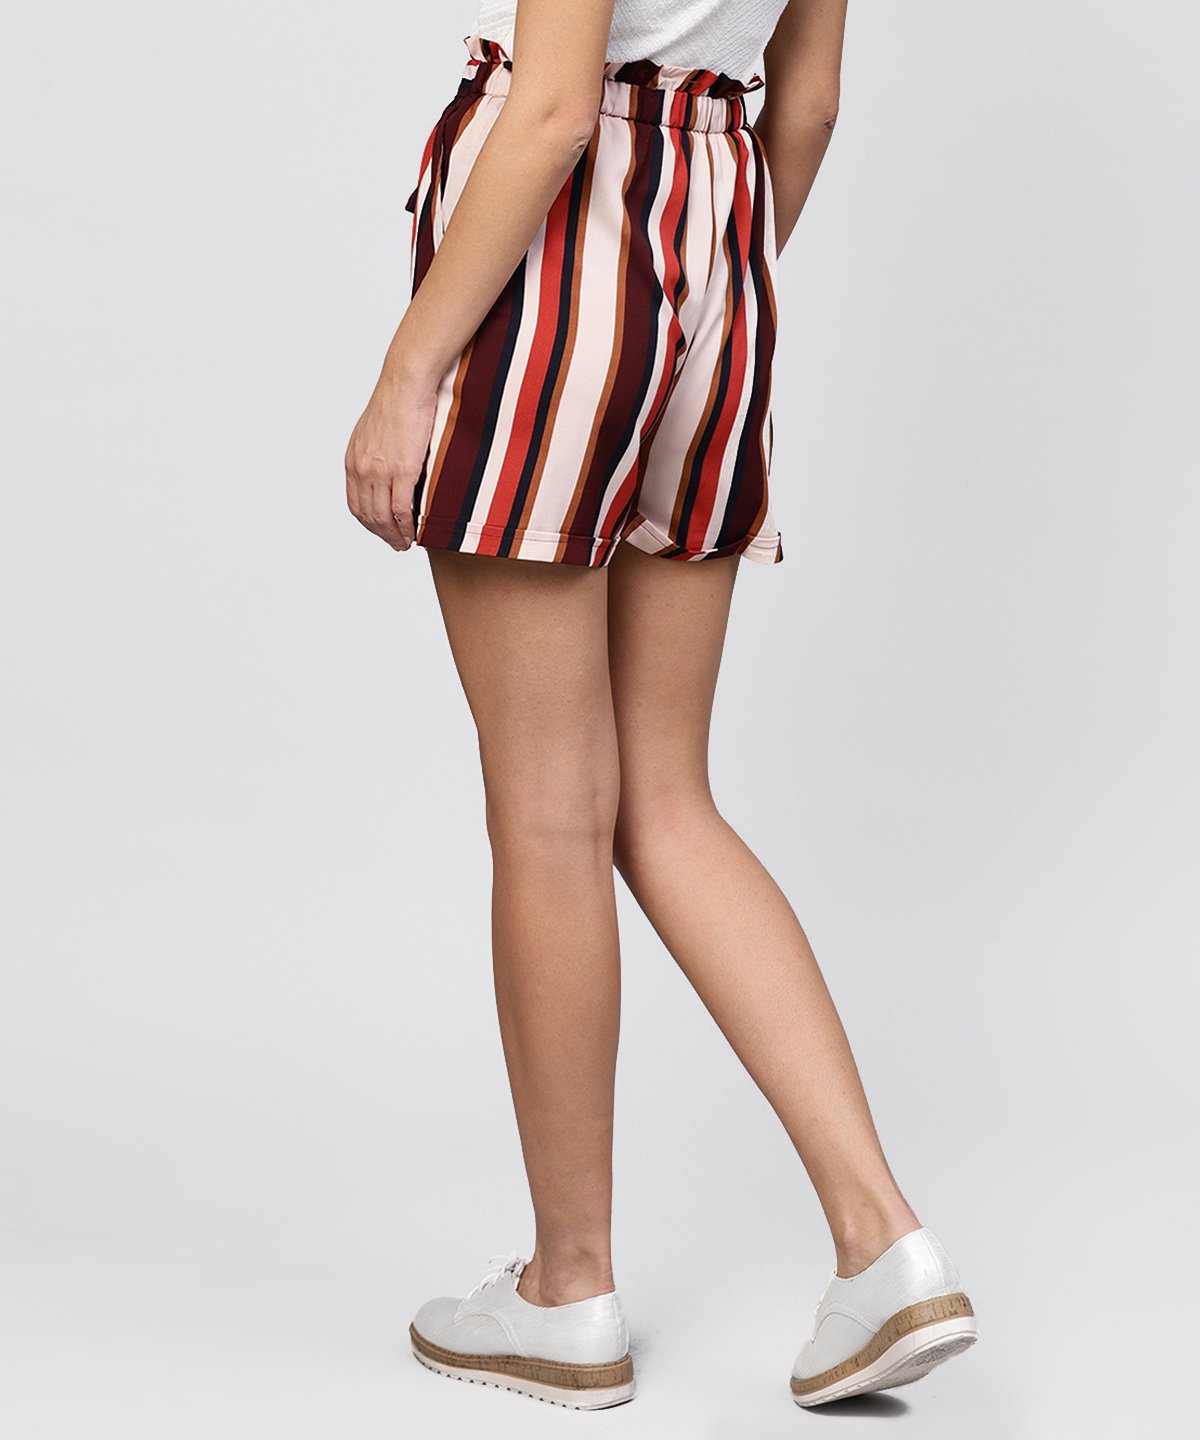 Women's Multi Colored Striped Shorts With Fabric Belt - Nayo Clothing